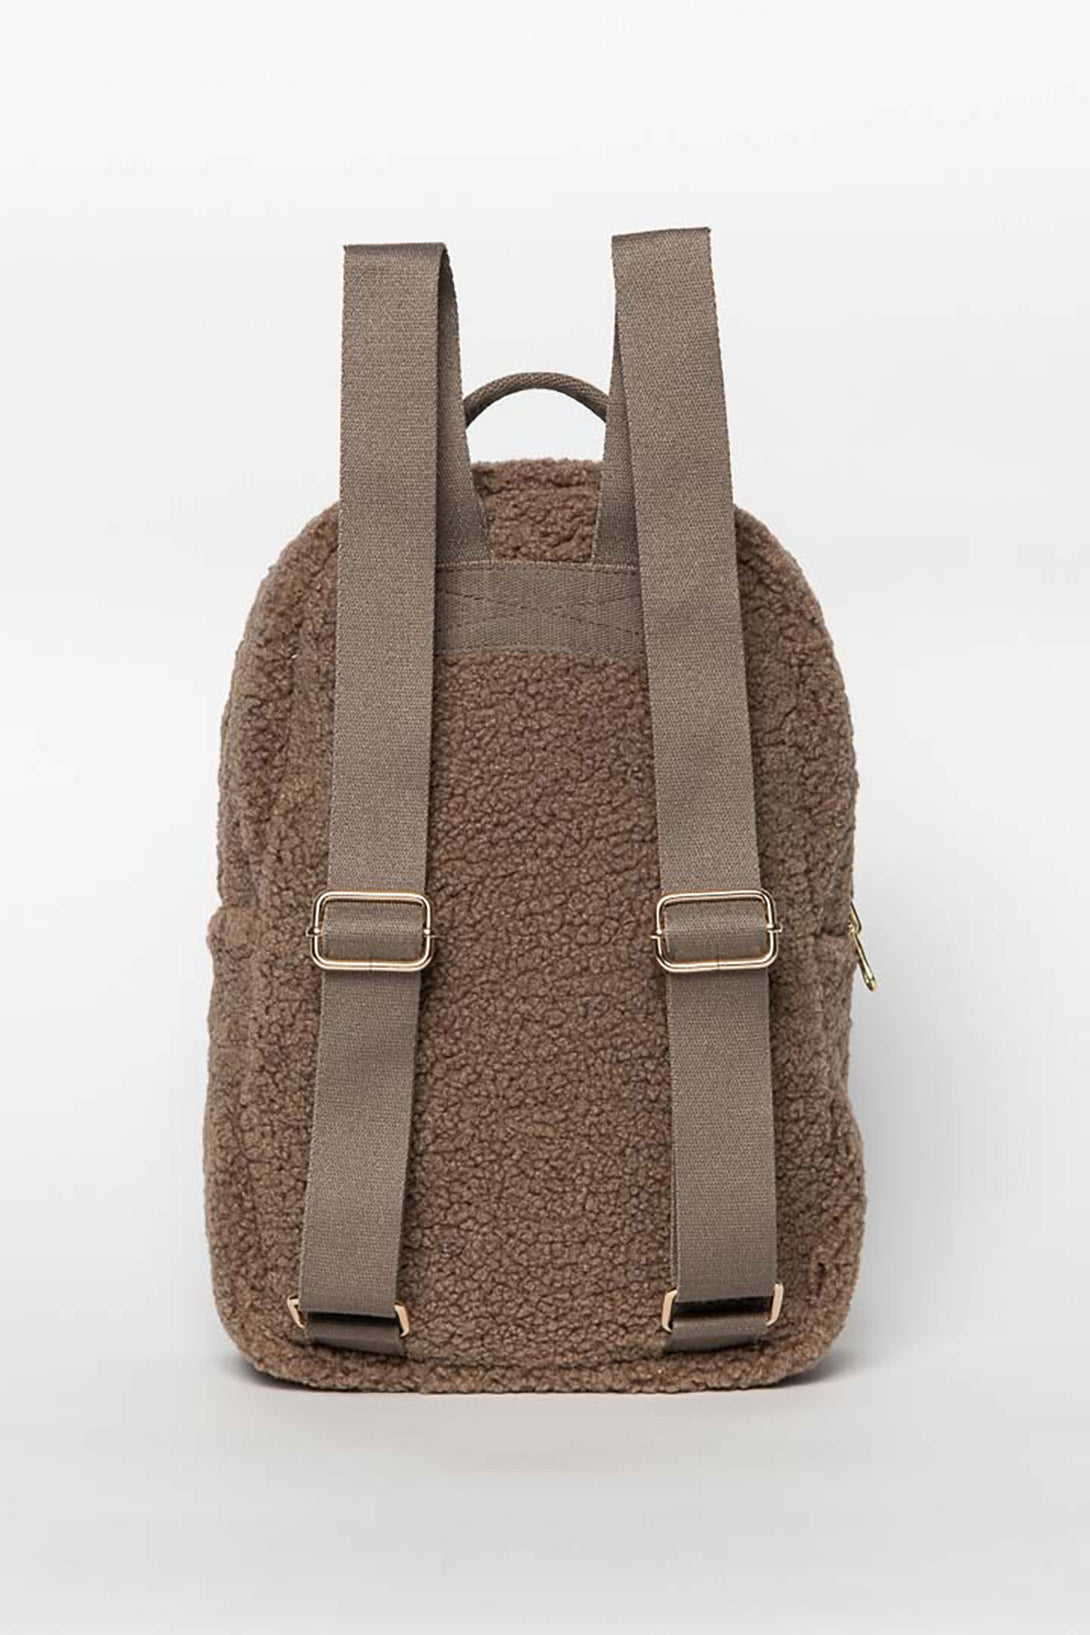 【Studio Noos】【30%OFF】Brown Noos mini-Chunky backpack　リュックサック  | Coucoubebe/ククベベ